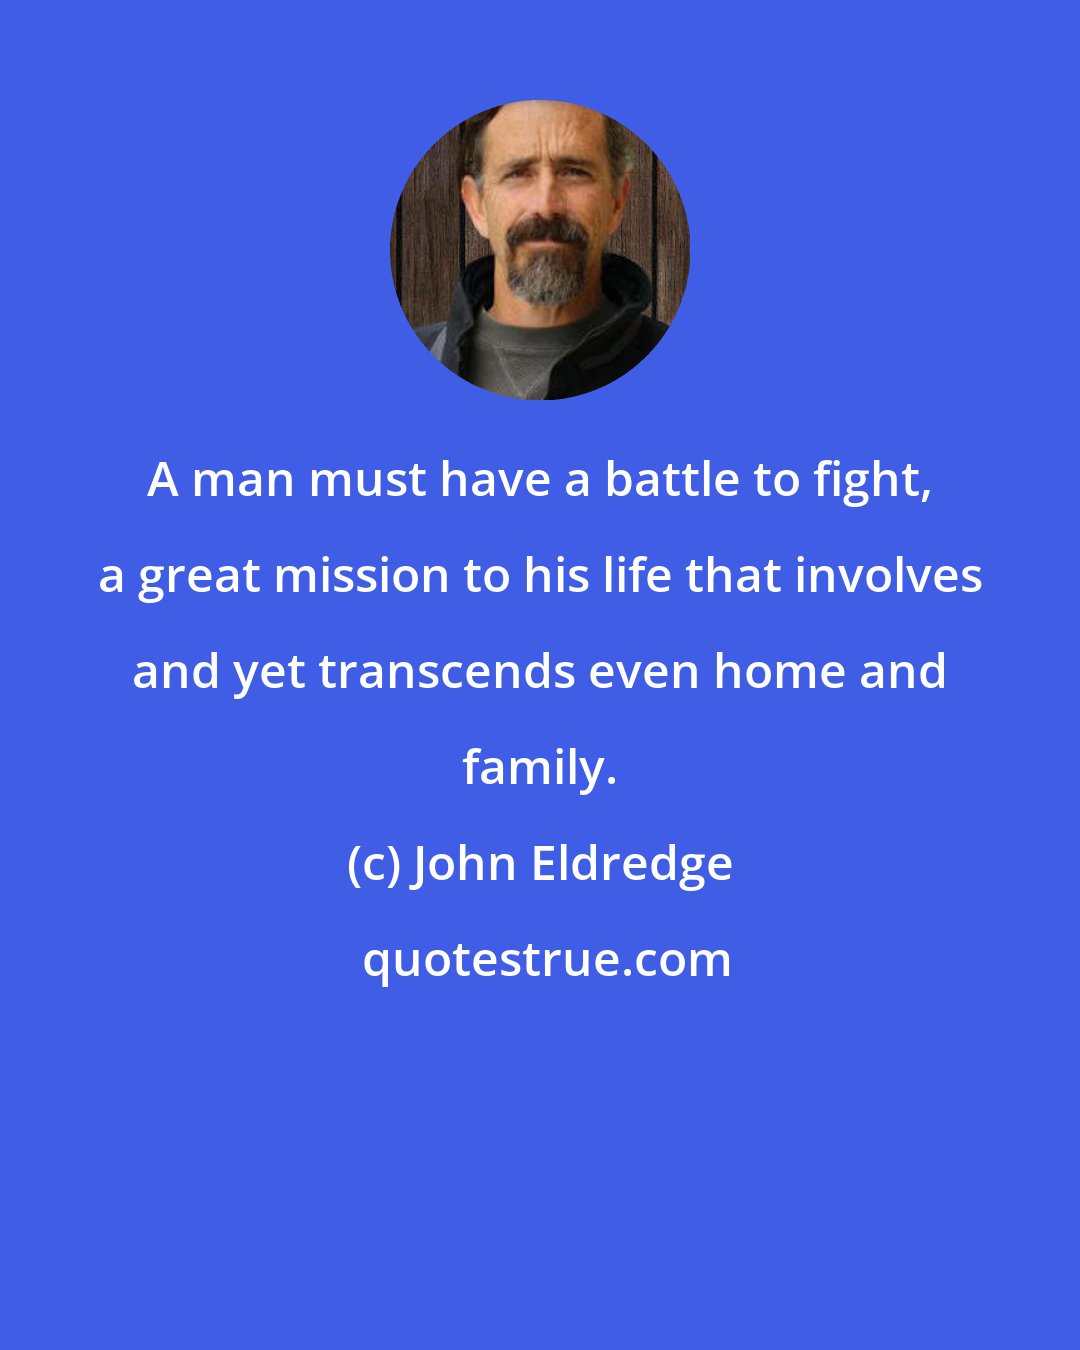 John Eldredge: A man must have a battle to fight, a great mission to his life that involves and yet transcends even home and family.